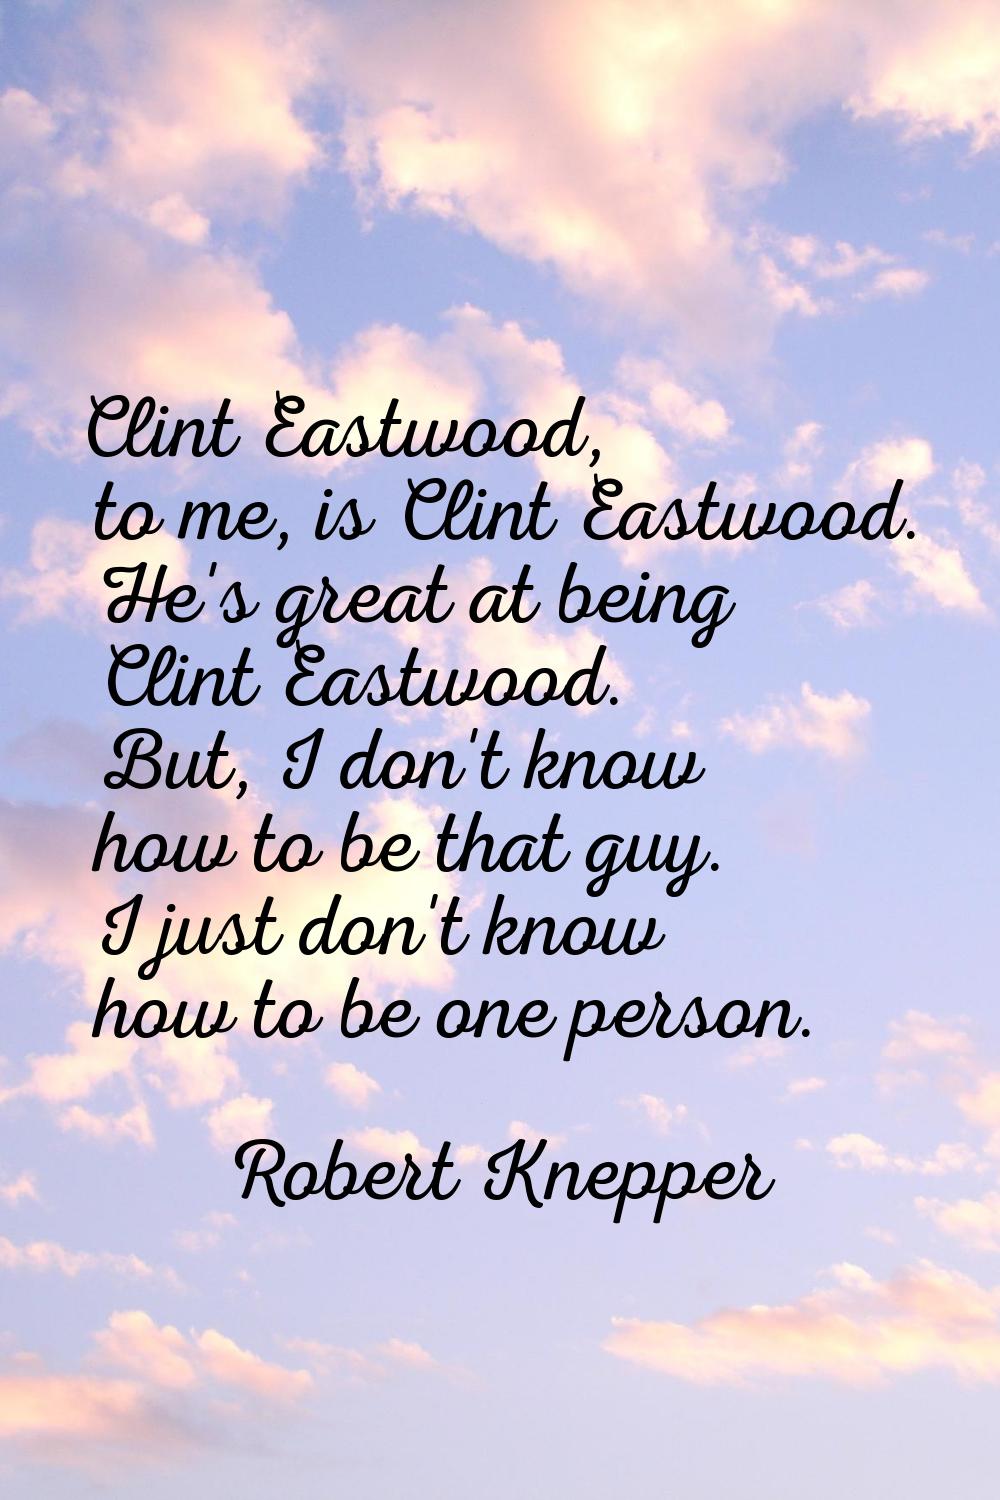 Clint Eastwood, to me, is Clint Eastwood. He's great at being Clint Eastwood. But, I don't know how